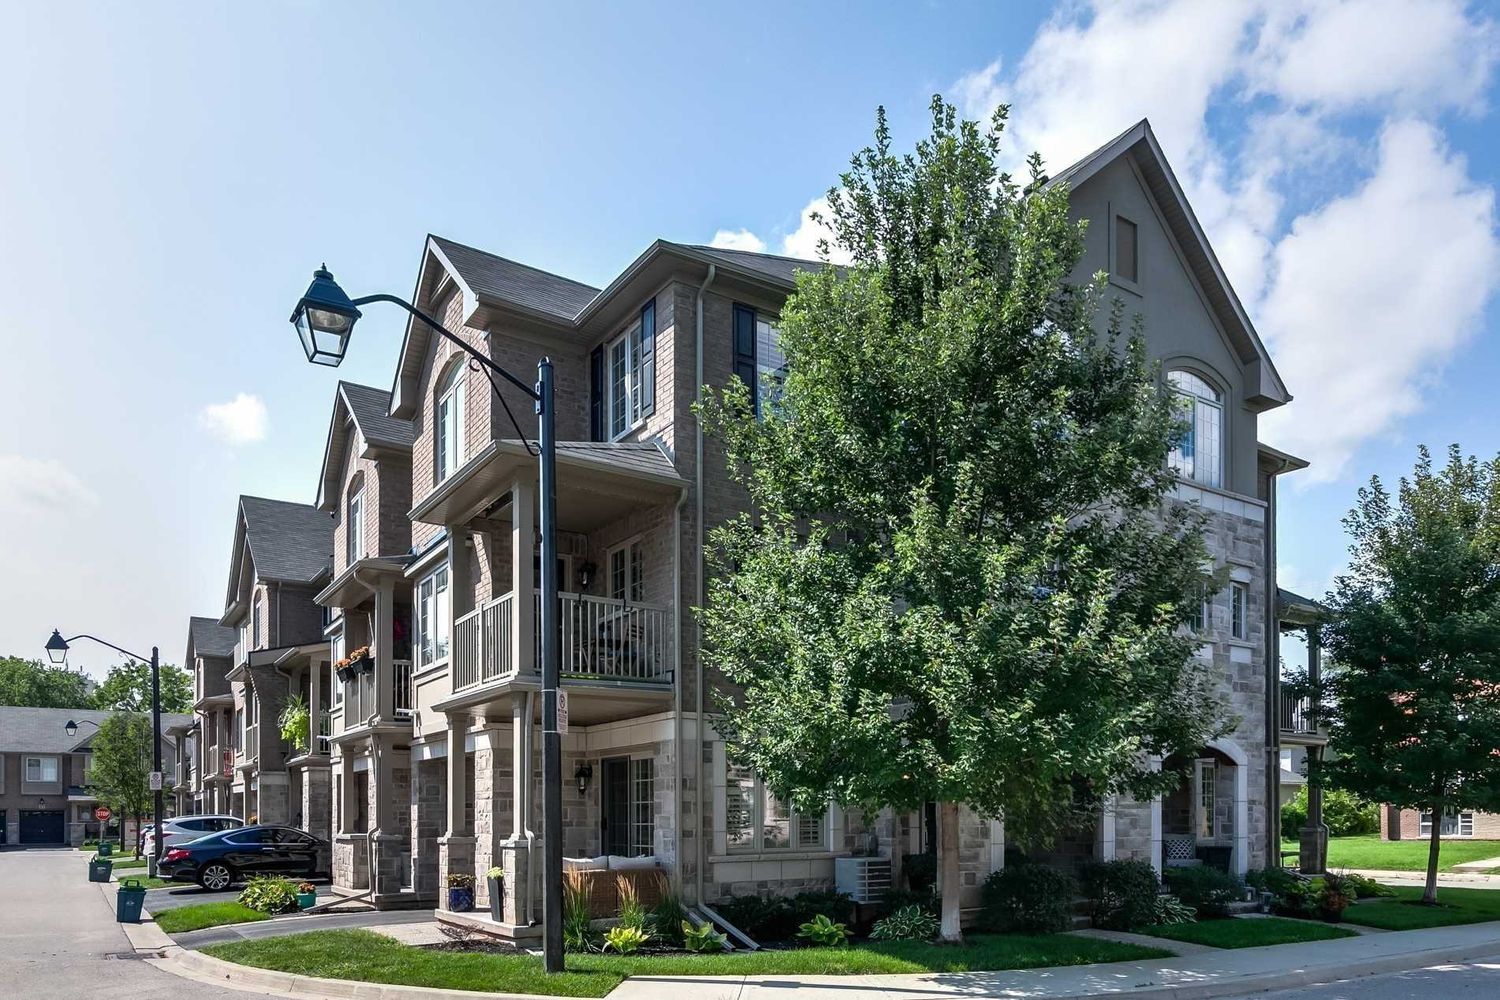 2086 Ghent Avenue. 2086 Ghent Avenue Townhomes is located in  Burlington, Toronto - image #2 of 2